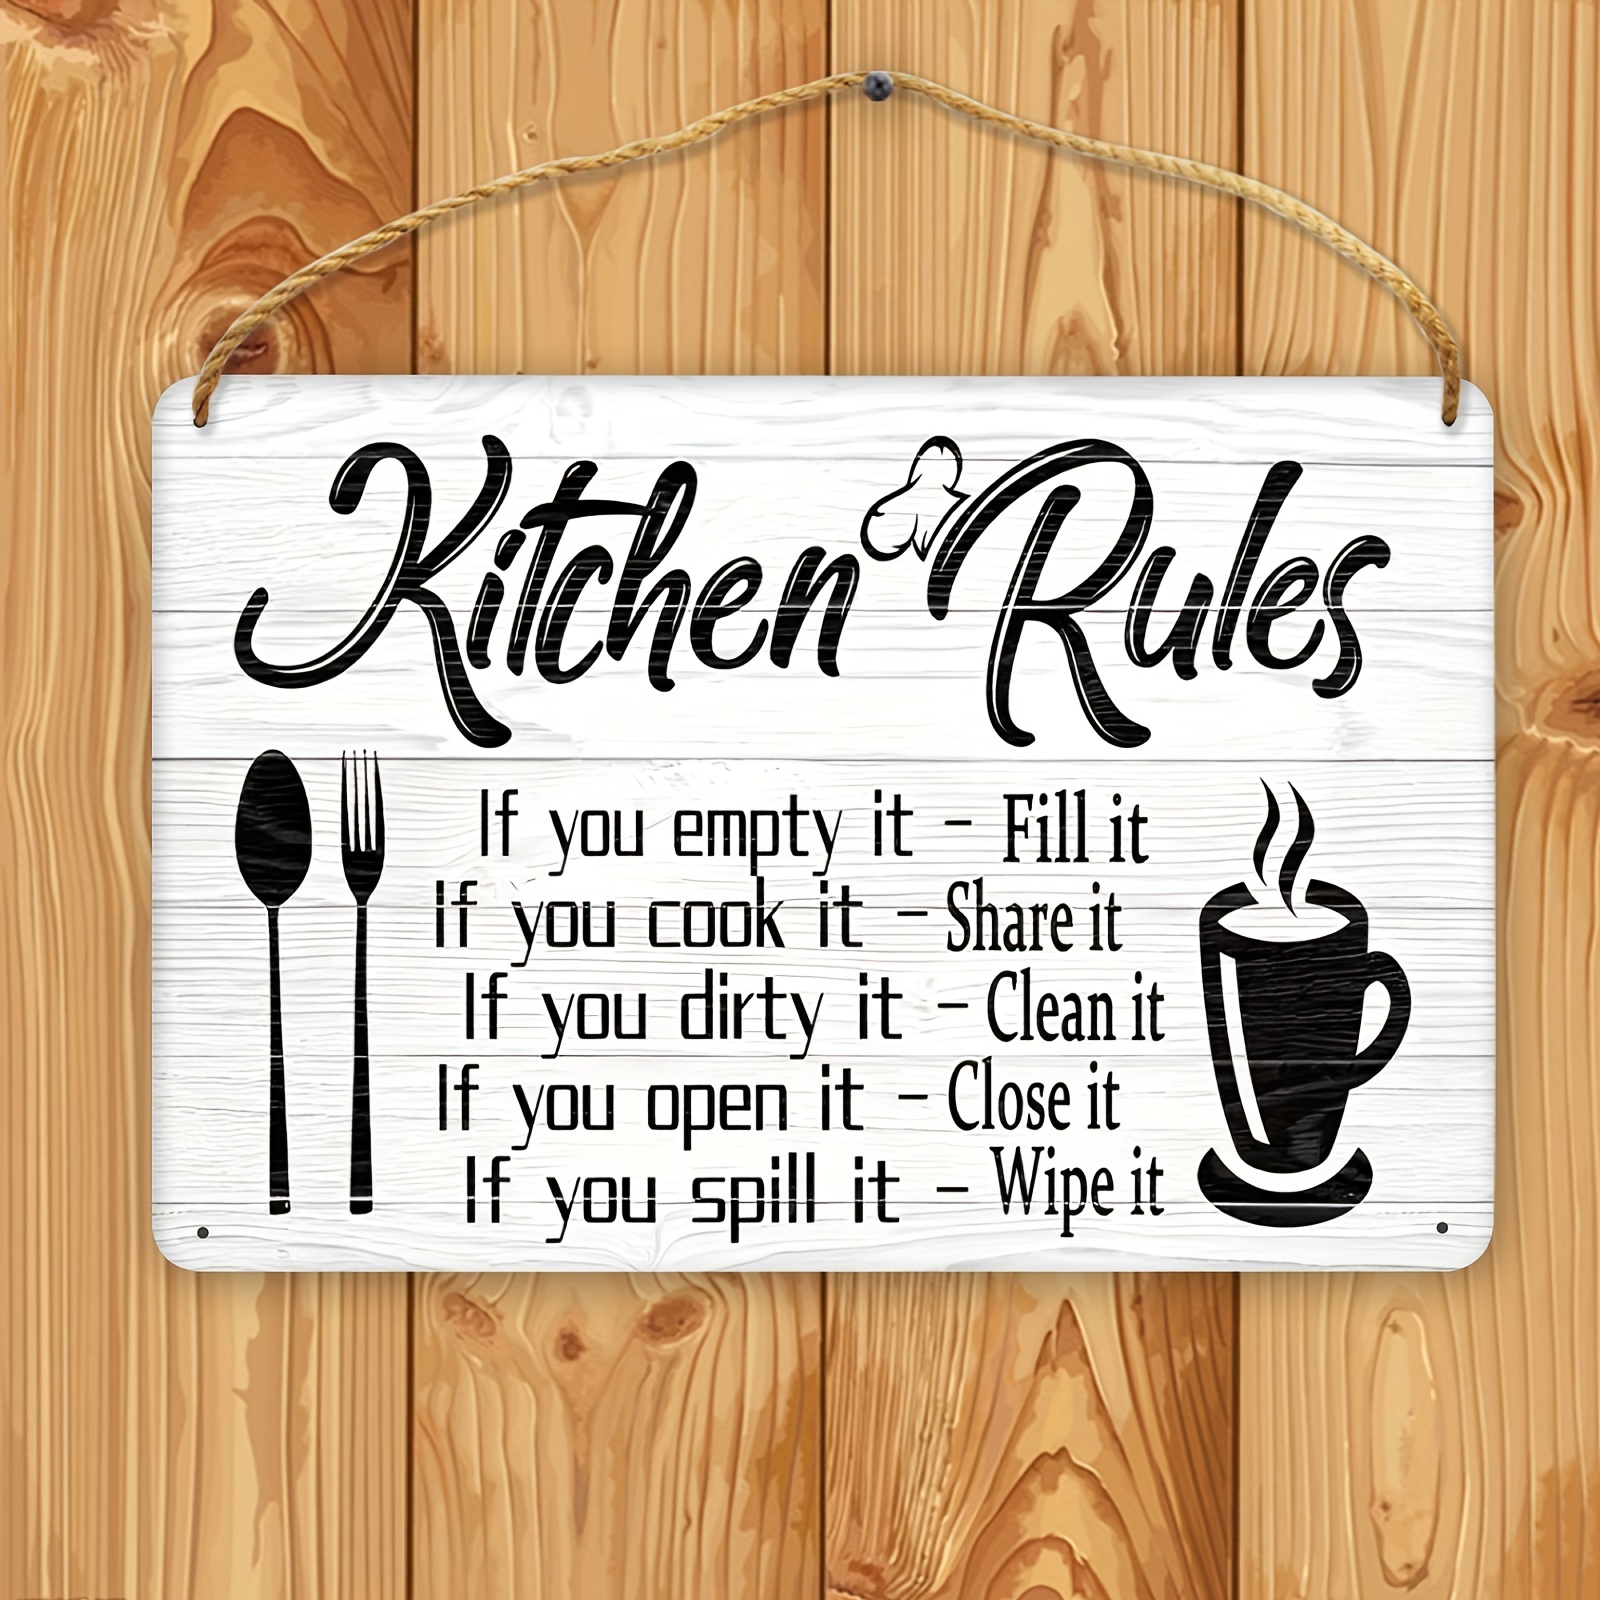 10x8 My Kitchen My Rules Wood Funny Kitchen Sign – Designs by Prim